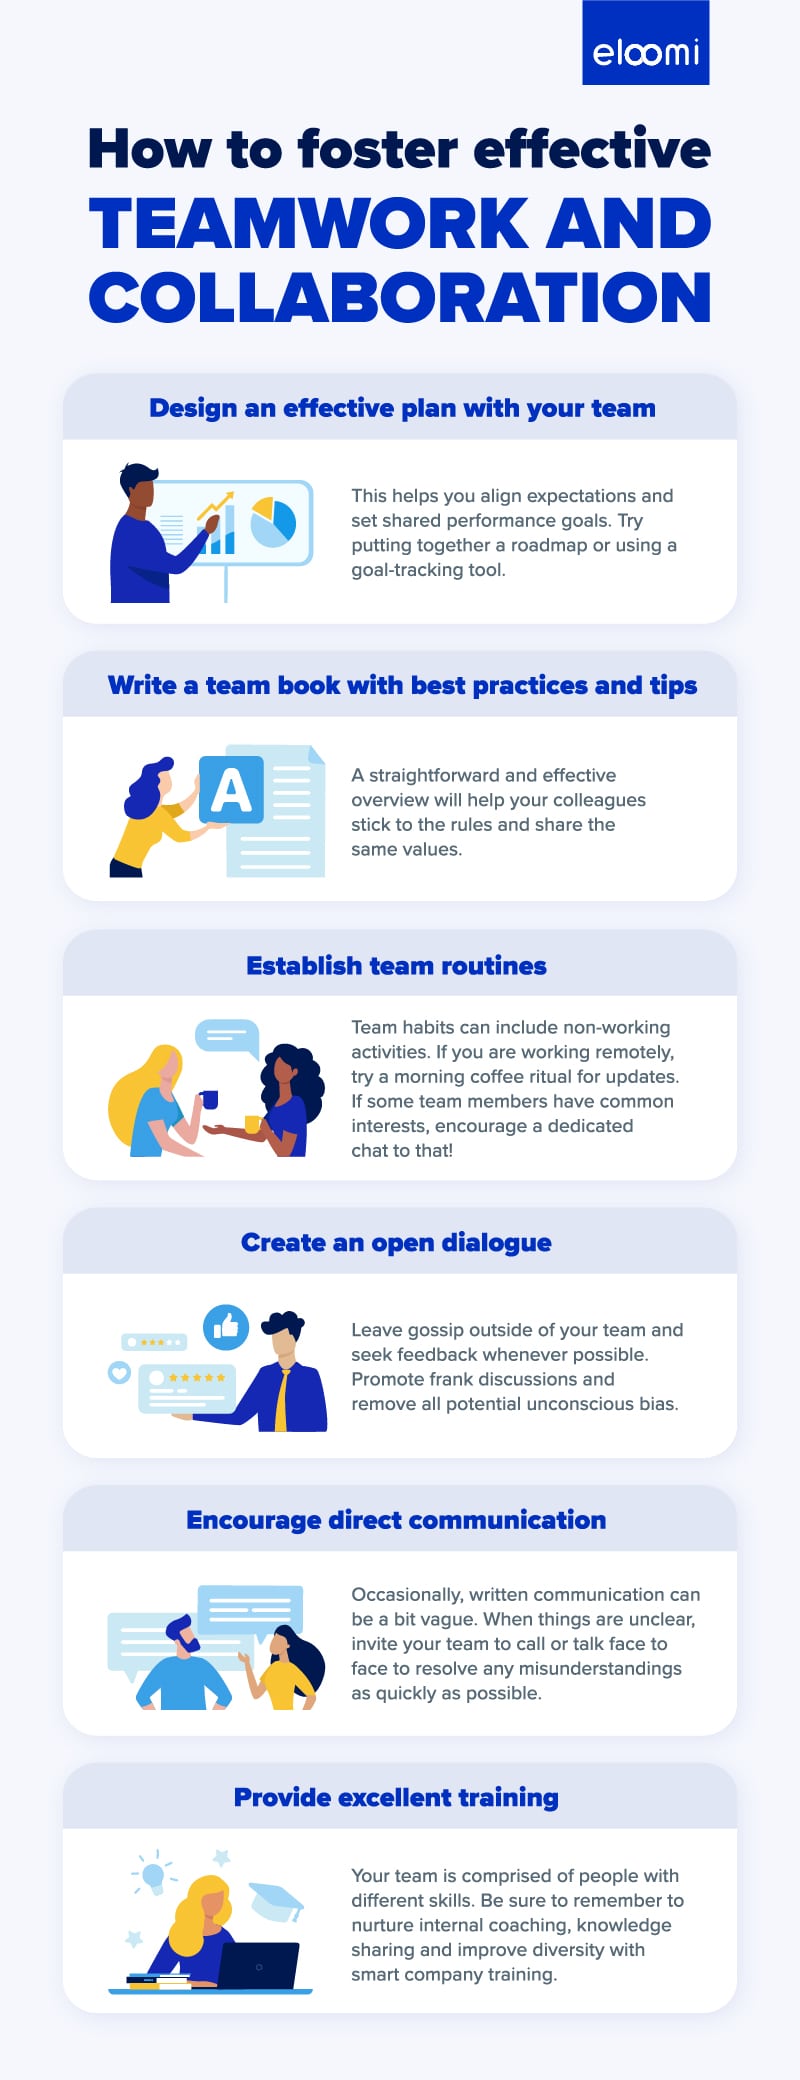 teamwork and collaboration infographic